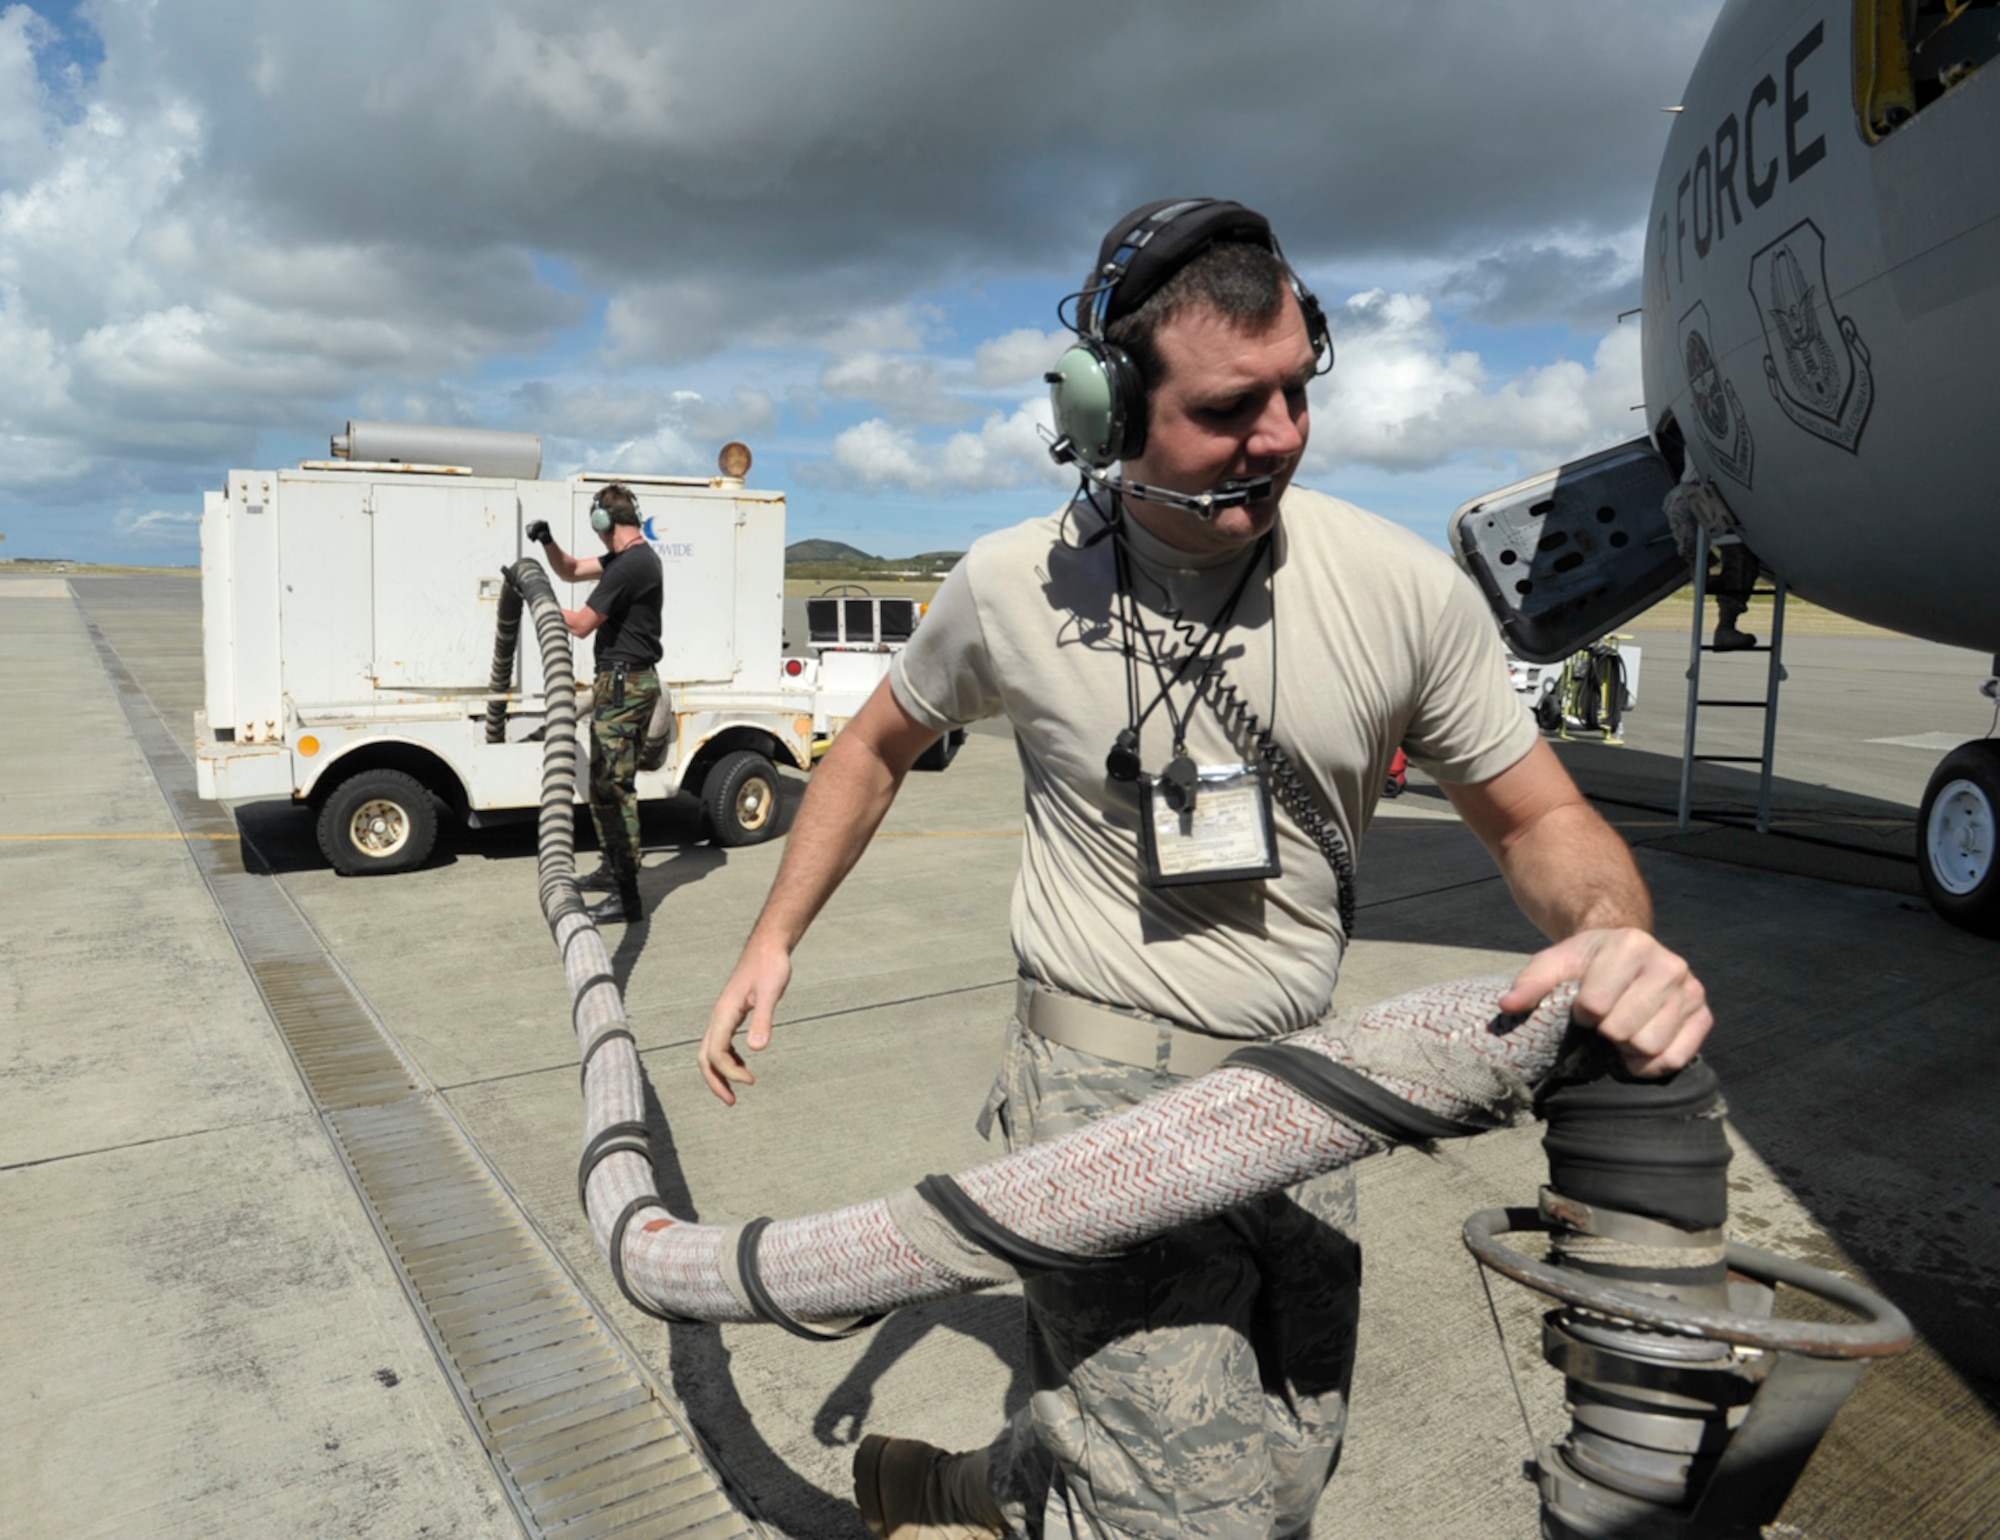 Staff Sgt. Scott Perkins carries an air hose to a KC-135 Stratotanker at an airfield in St. Croix, U.S. Virgin Islands. The tanker was being prepared to depart for the end of a three-day aeromedical evacuation training mission supported by the 931st Air Refueling Group. Sergeant Perkins is a crew chief assigned to the 931st Aircraft Maintenance Squadron. (U.S. Air Force photo/Tech. Sgt. Jason Schaap)